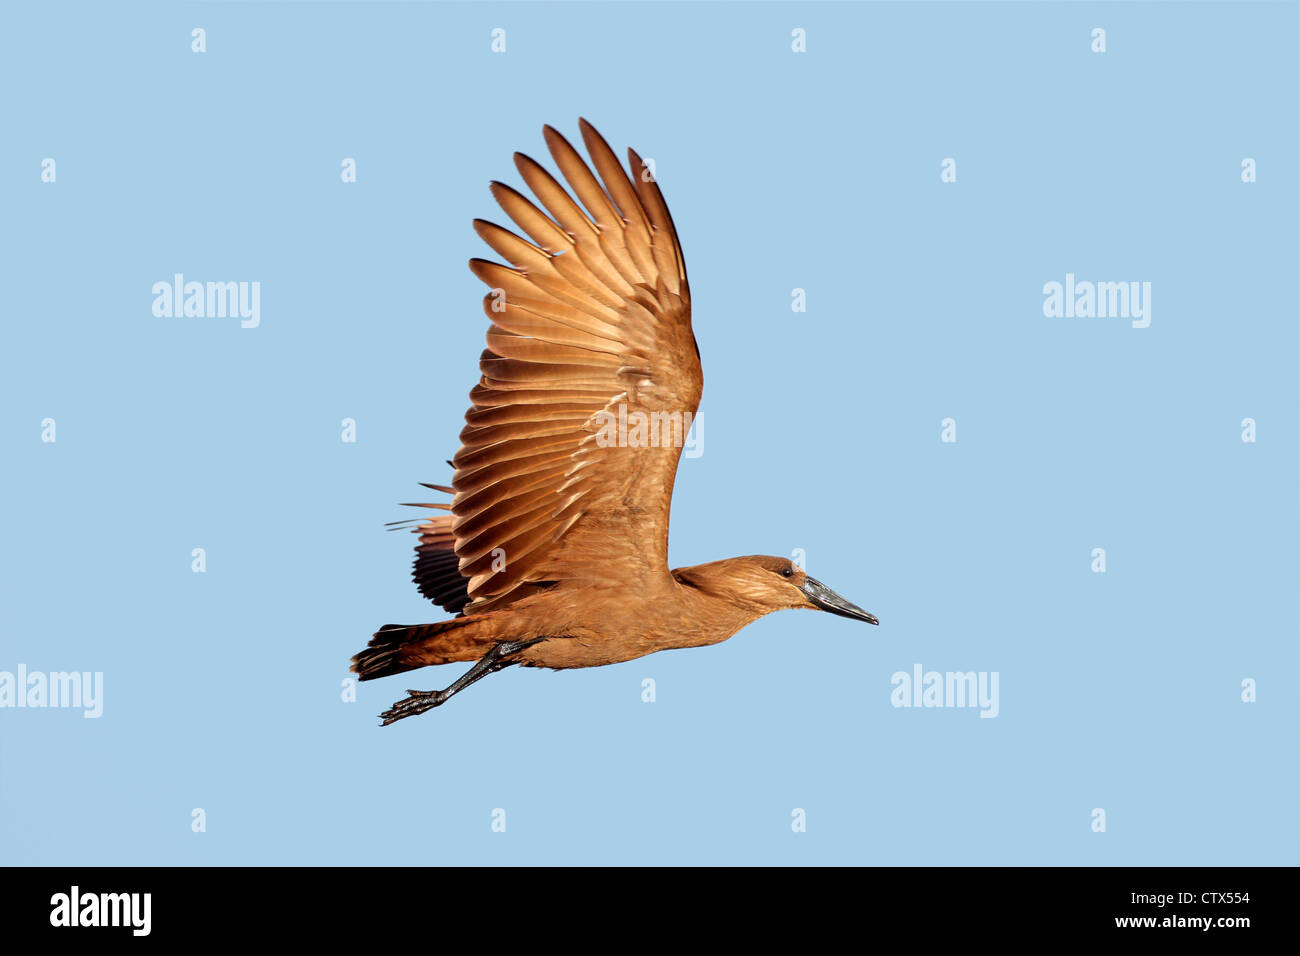 Hammerkop bird (Scopus umbretta) in flight with outstretched wings, South Africa Stock Photo